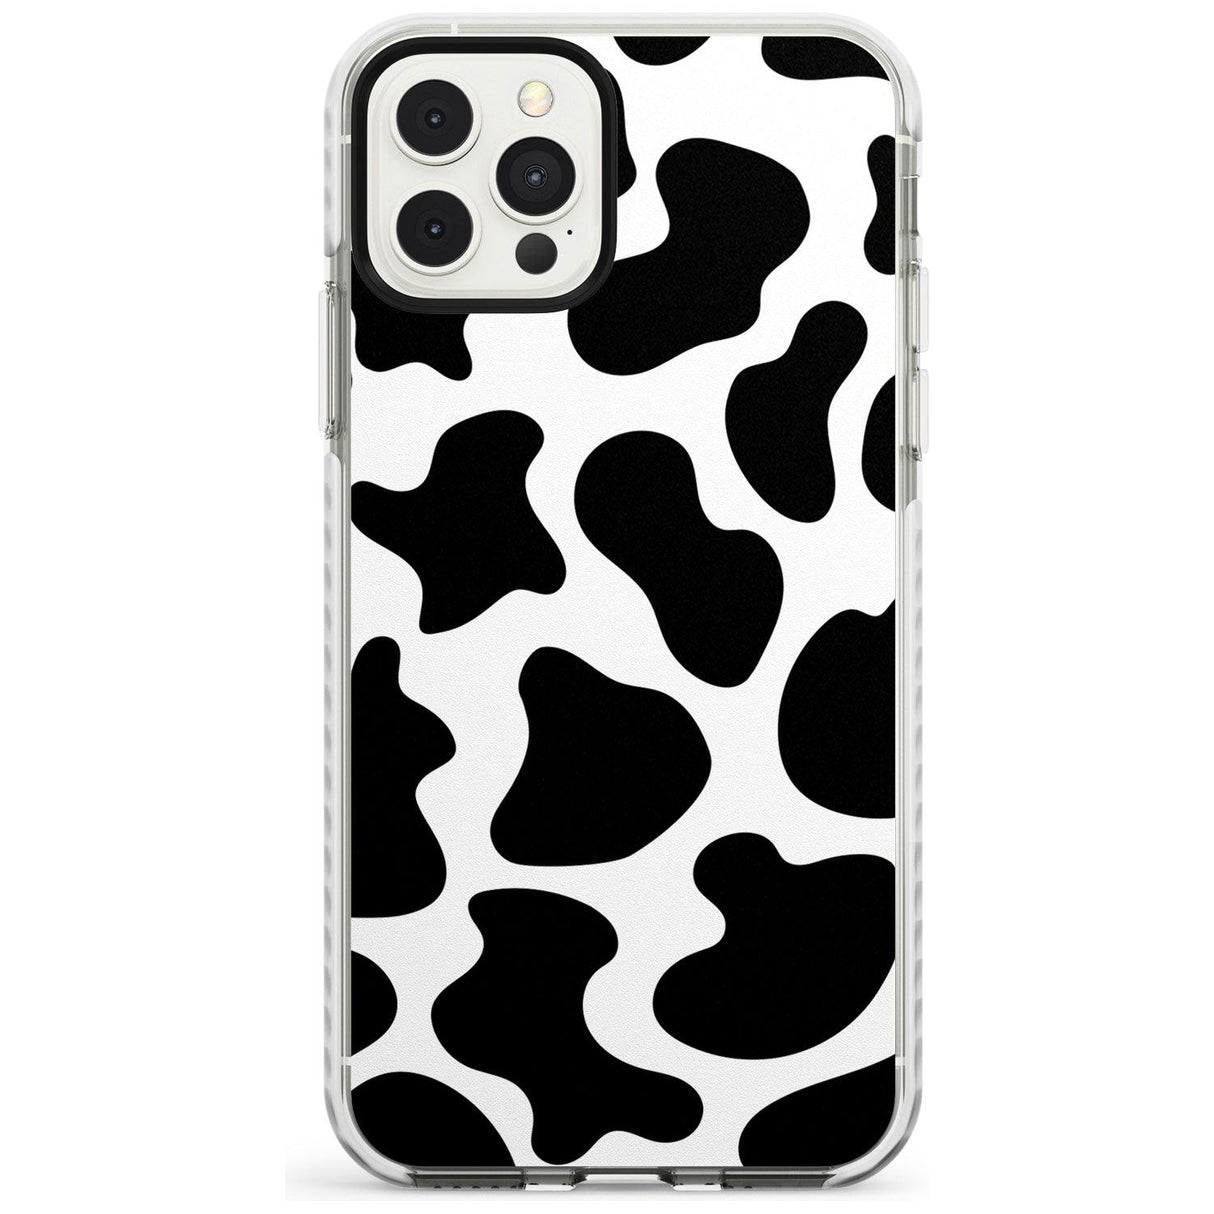 Cow Print Slim TPU Phone Case for iPhone 11 Pro Max